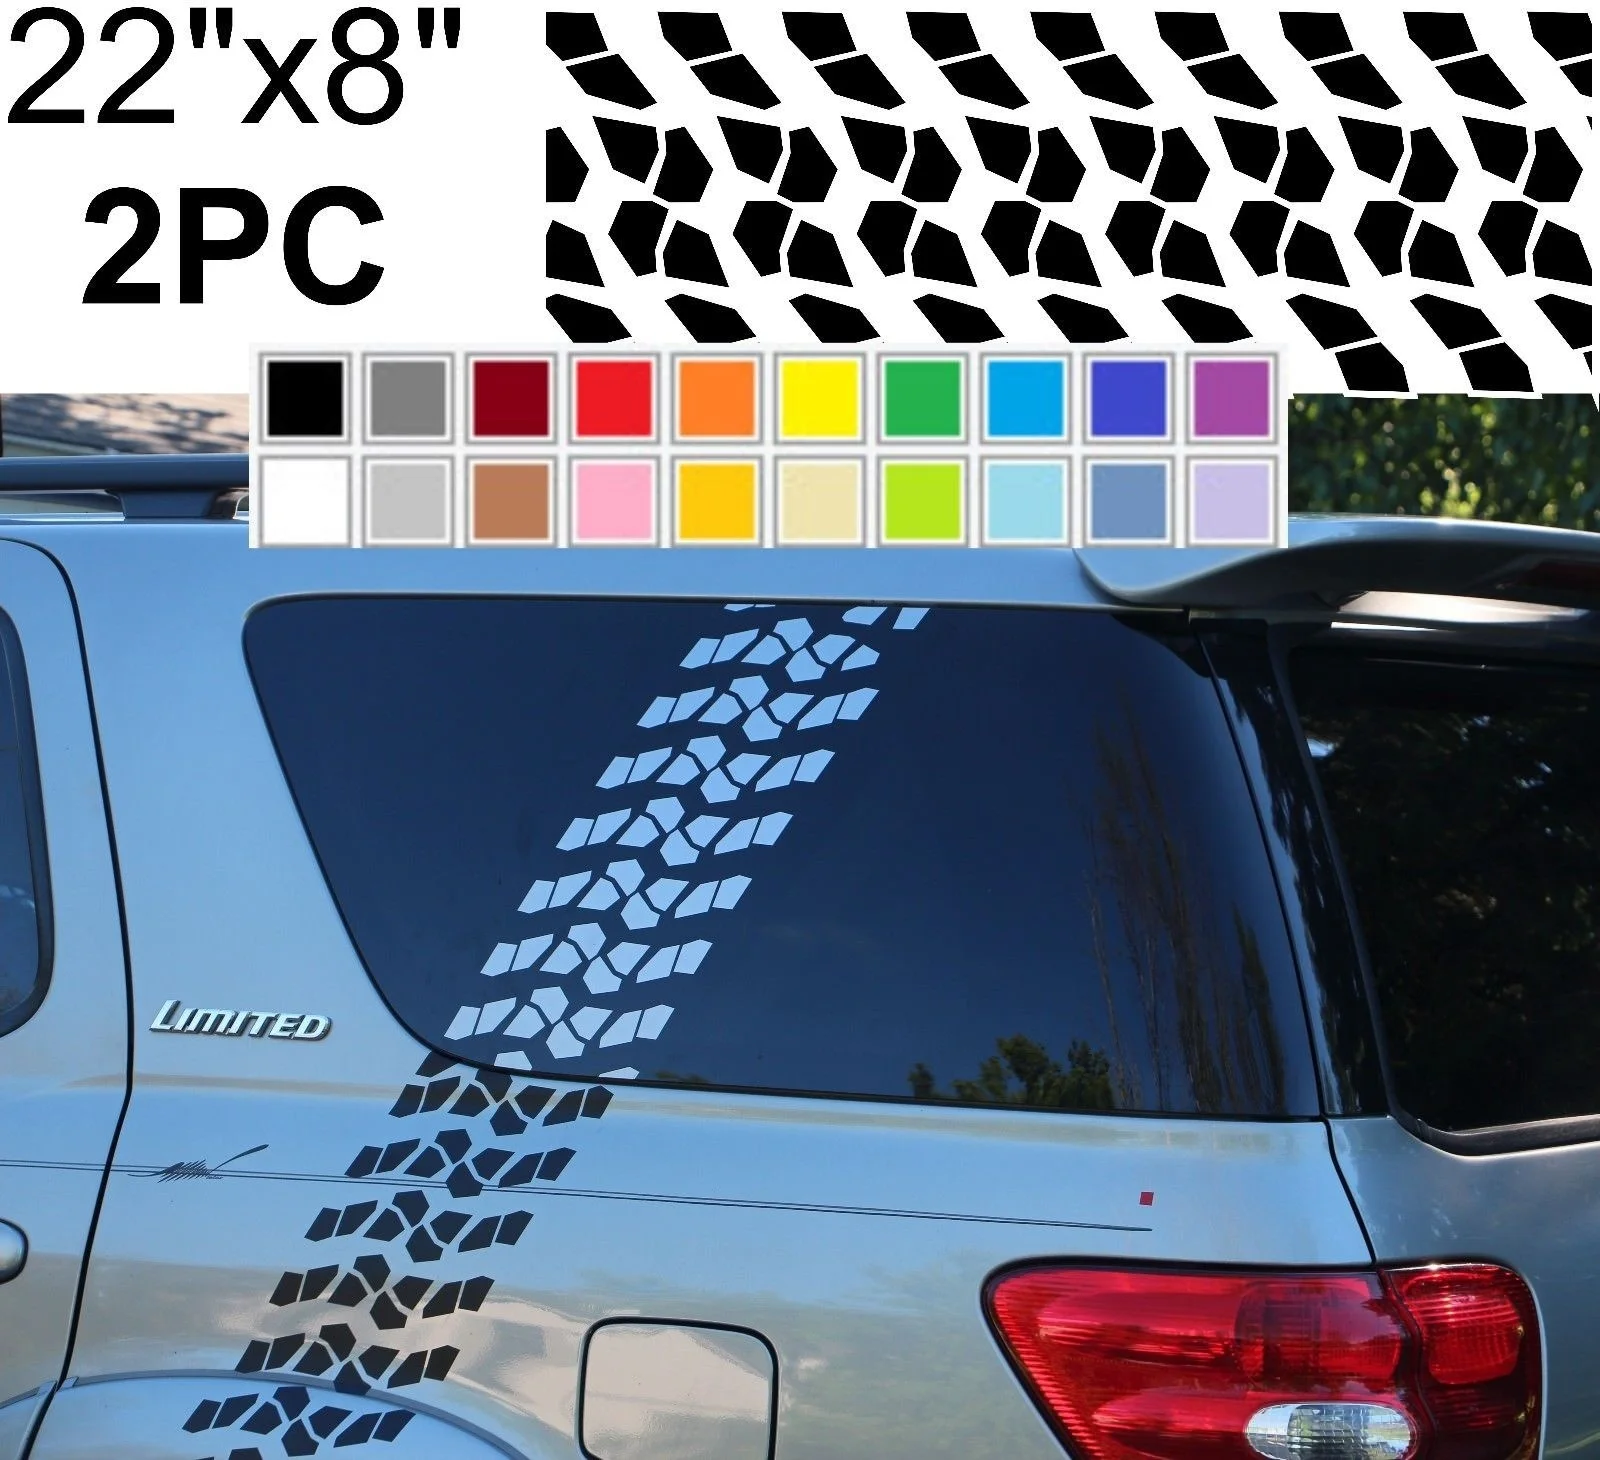 2m Tyre Tracks Tread 4x4 Stickers Decals Graphic Off road 